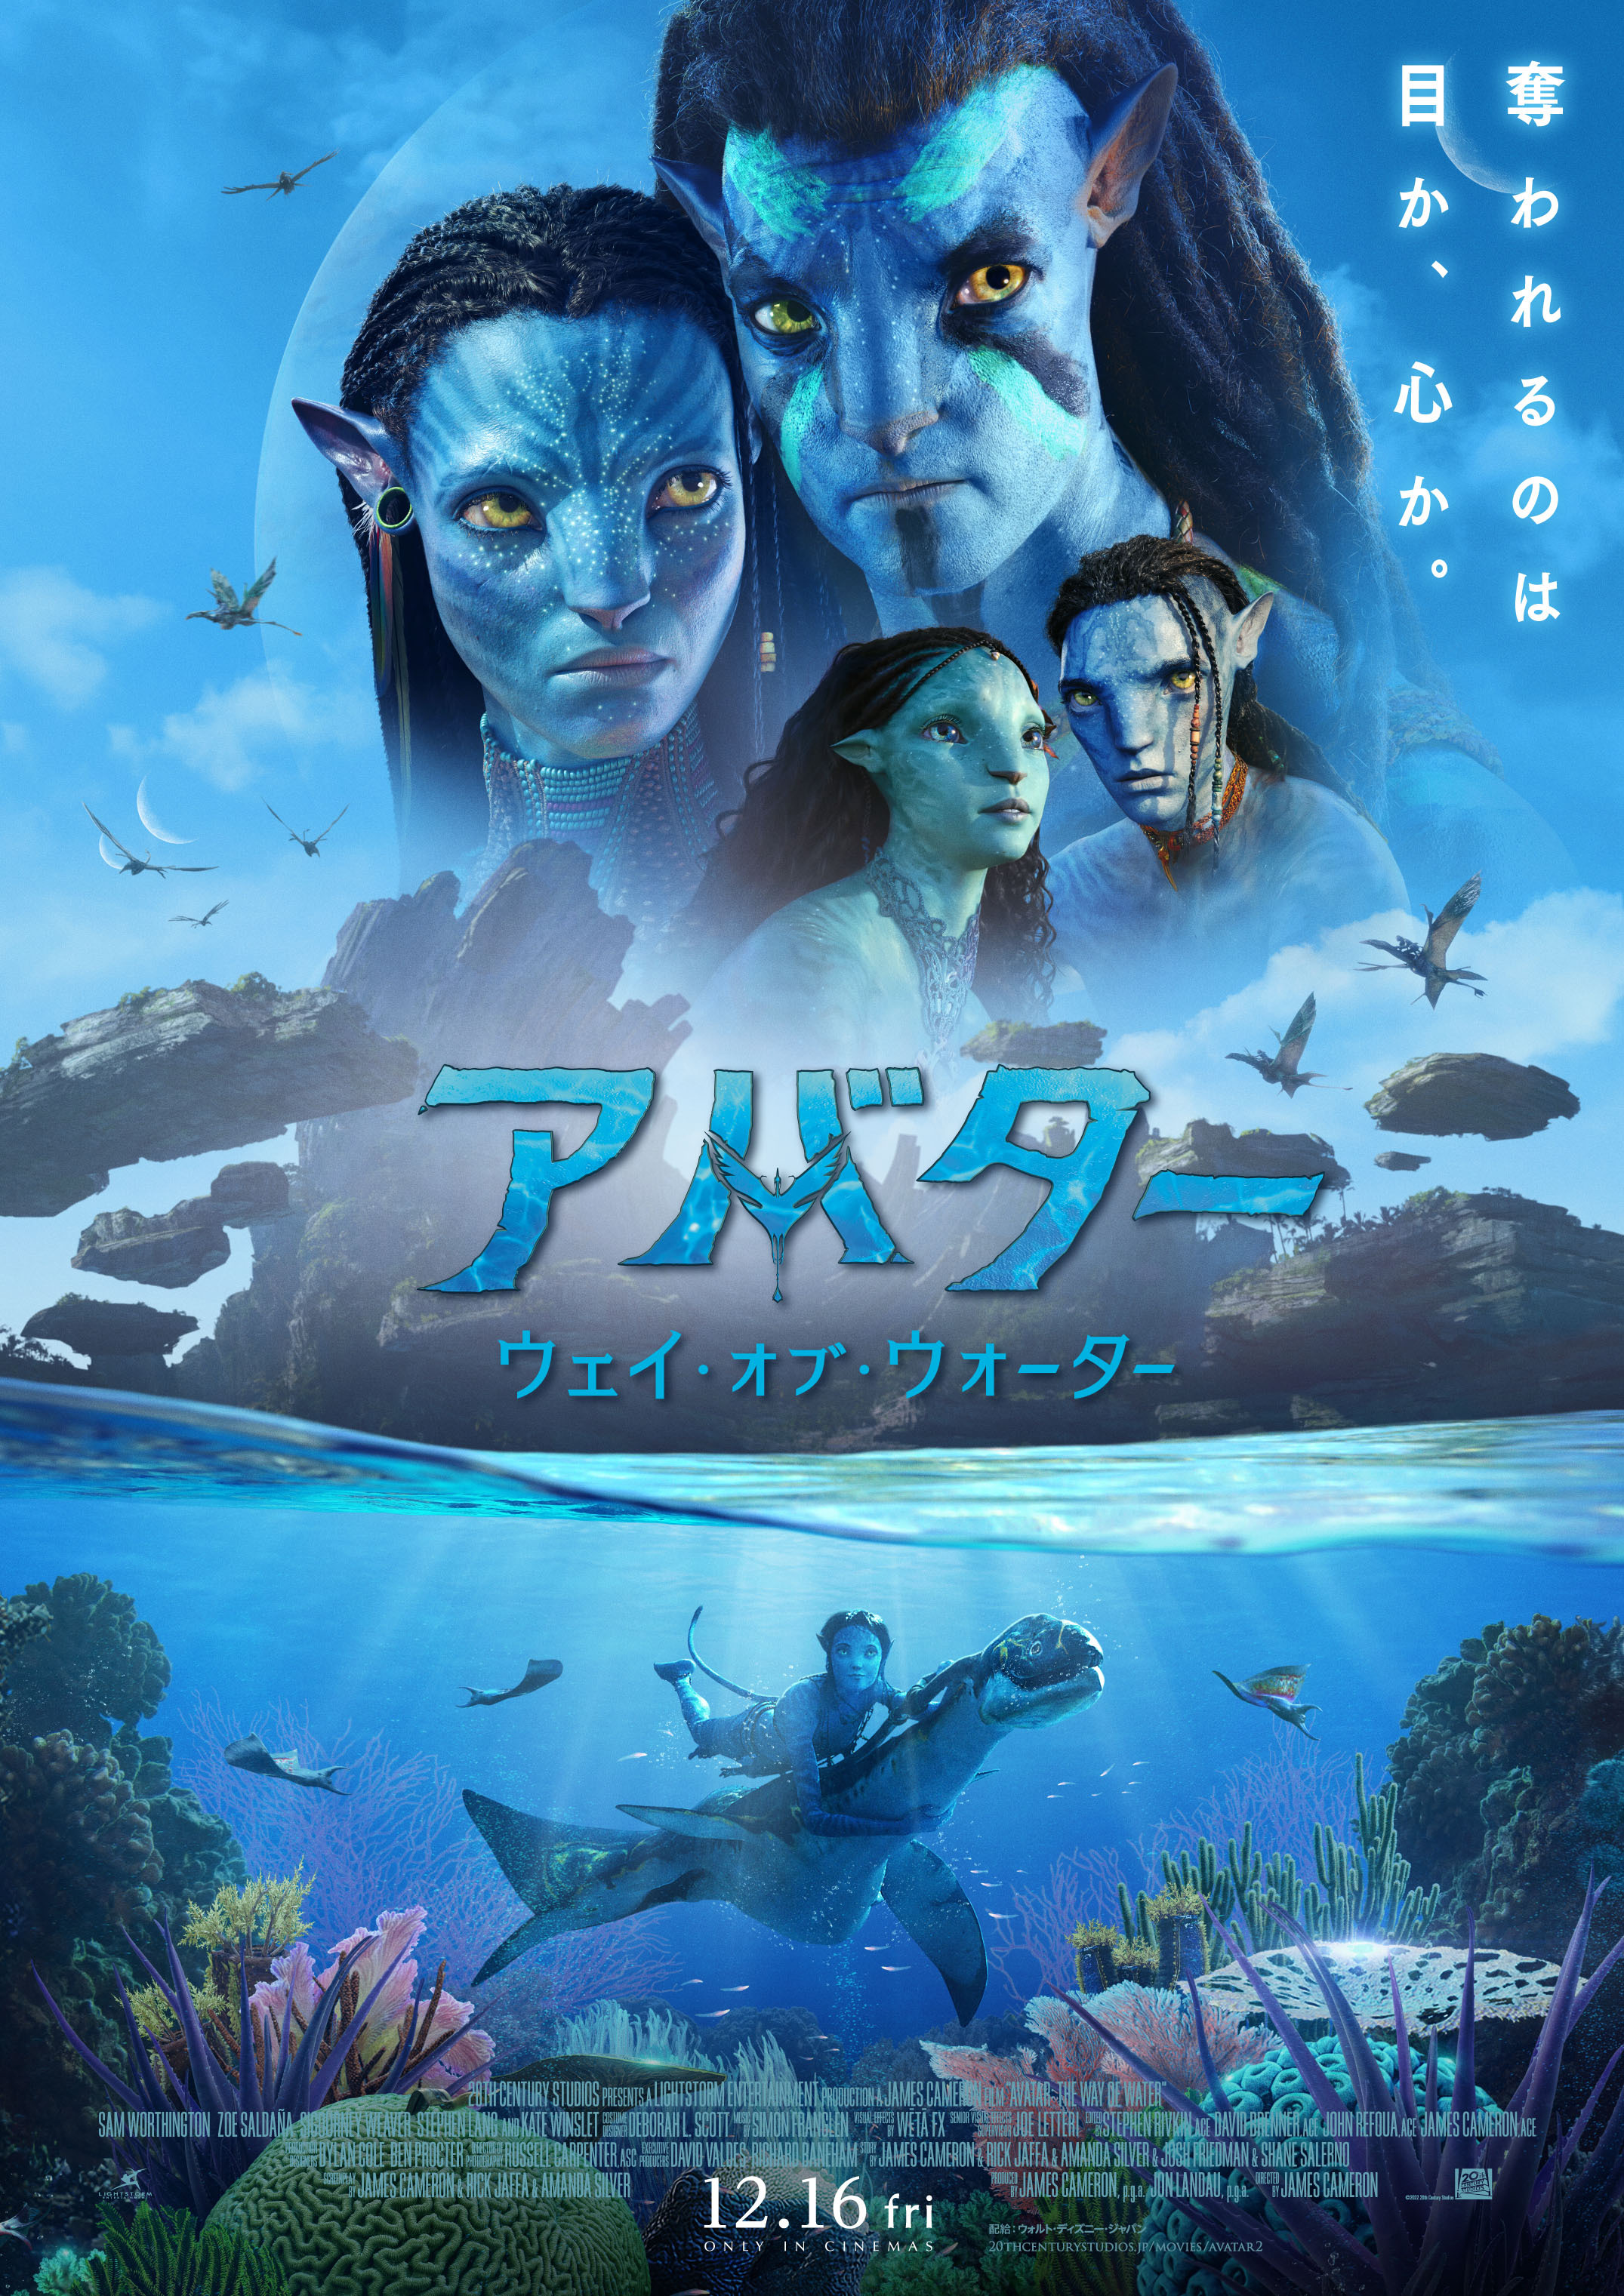 Avatar out the Japanese poster for #AvatarTheWayOfWater only in theaters December 16. Get tickets now